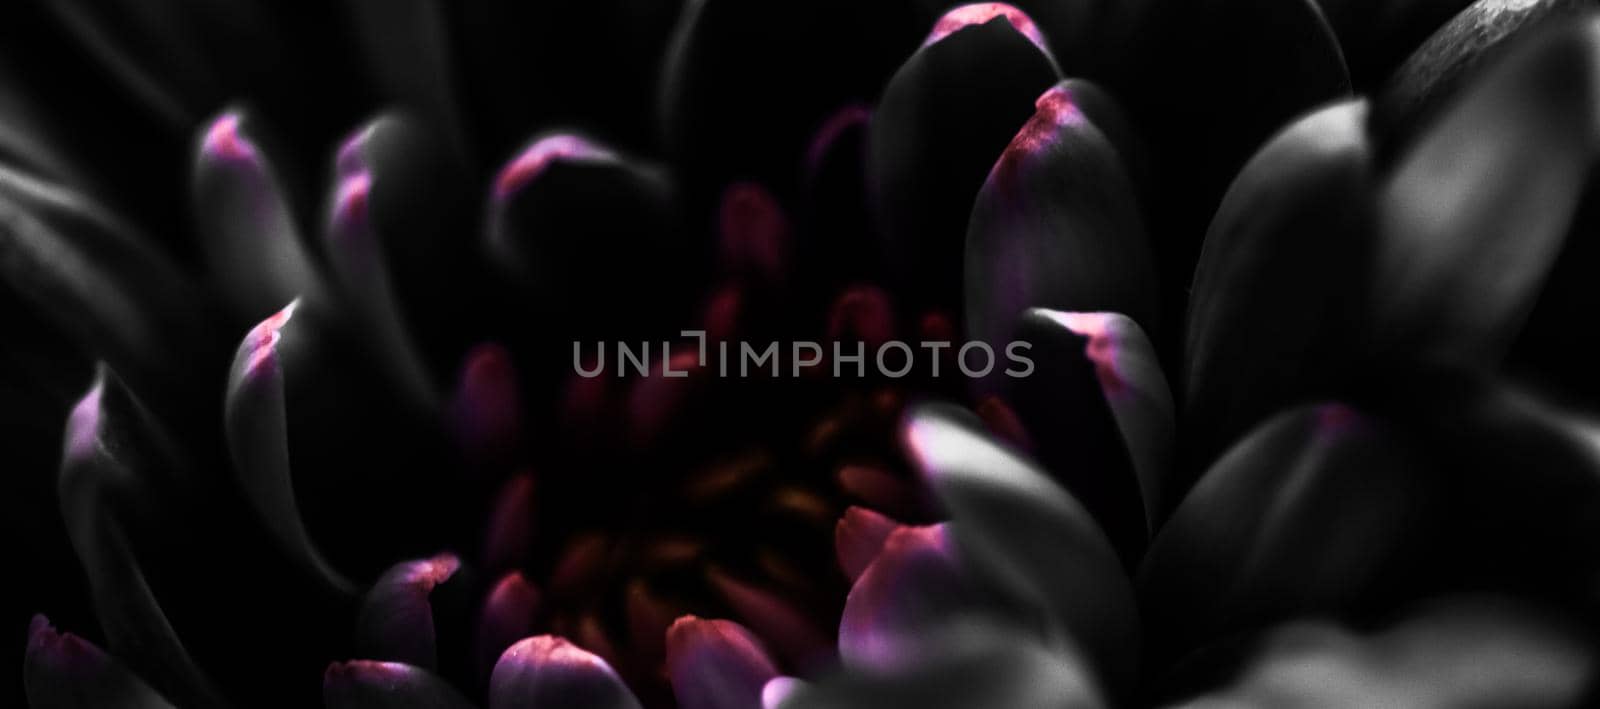 Flora, branding and love concept - Black daisy flower petals in bloom, abstract floral blossom art background, flowers in spring nature for perfume scent, wedding, luxury beauty brand holiday design